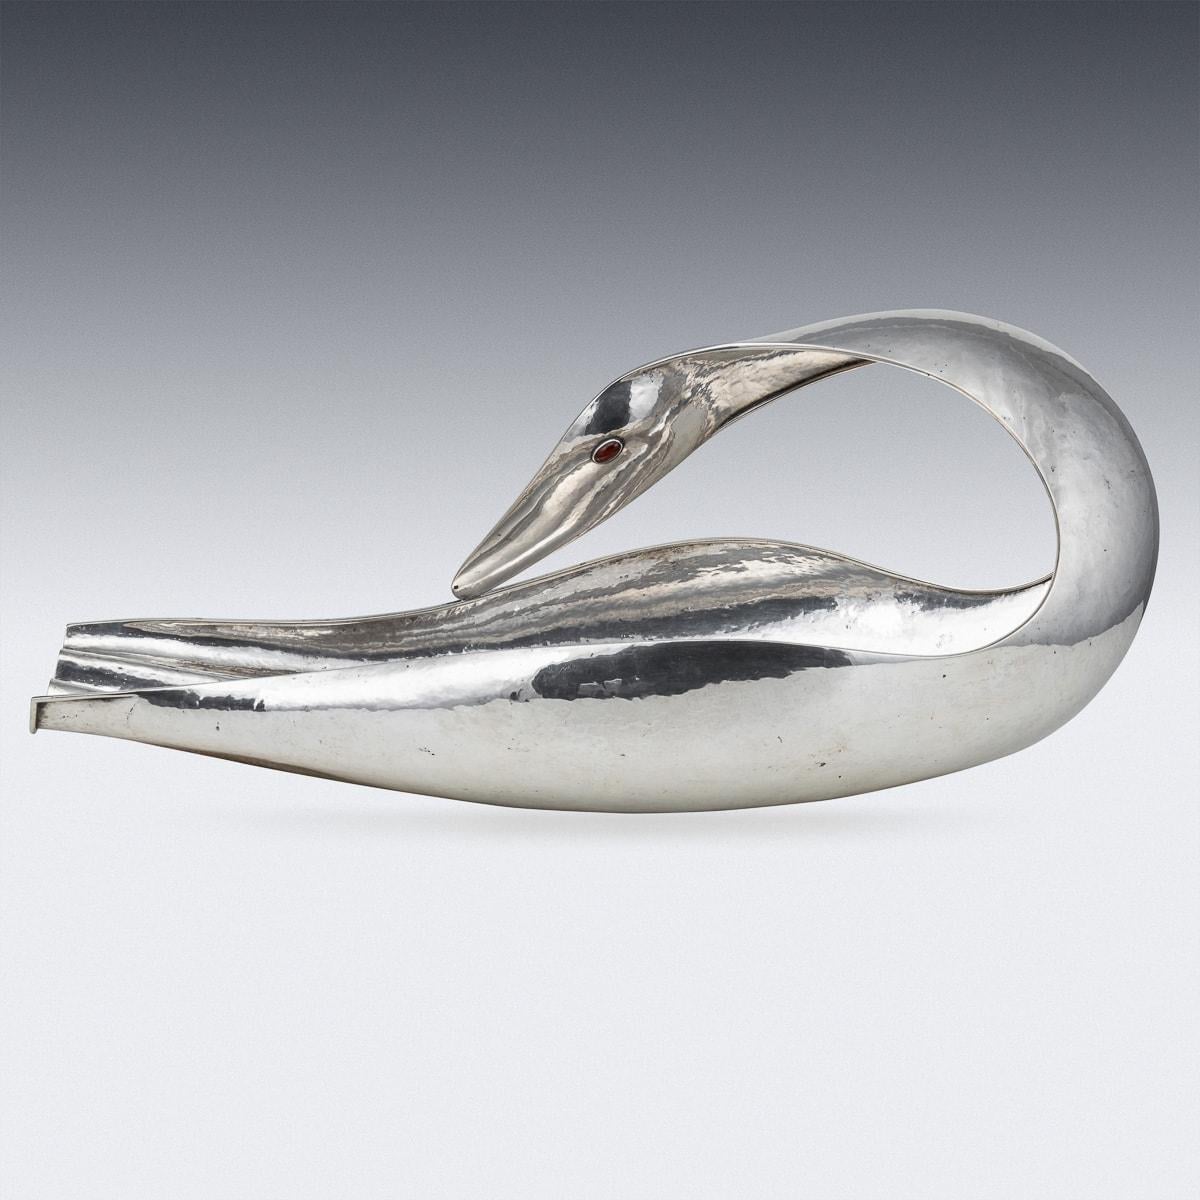 Italian Silver Baguette Tray In The Form Of A Swan, By Finzi c.1970 For Sale 1